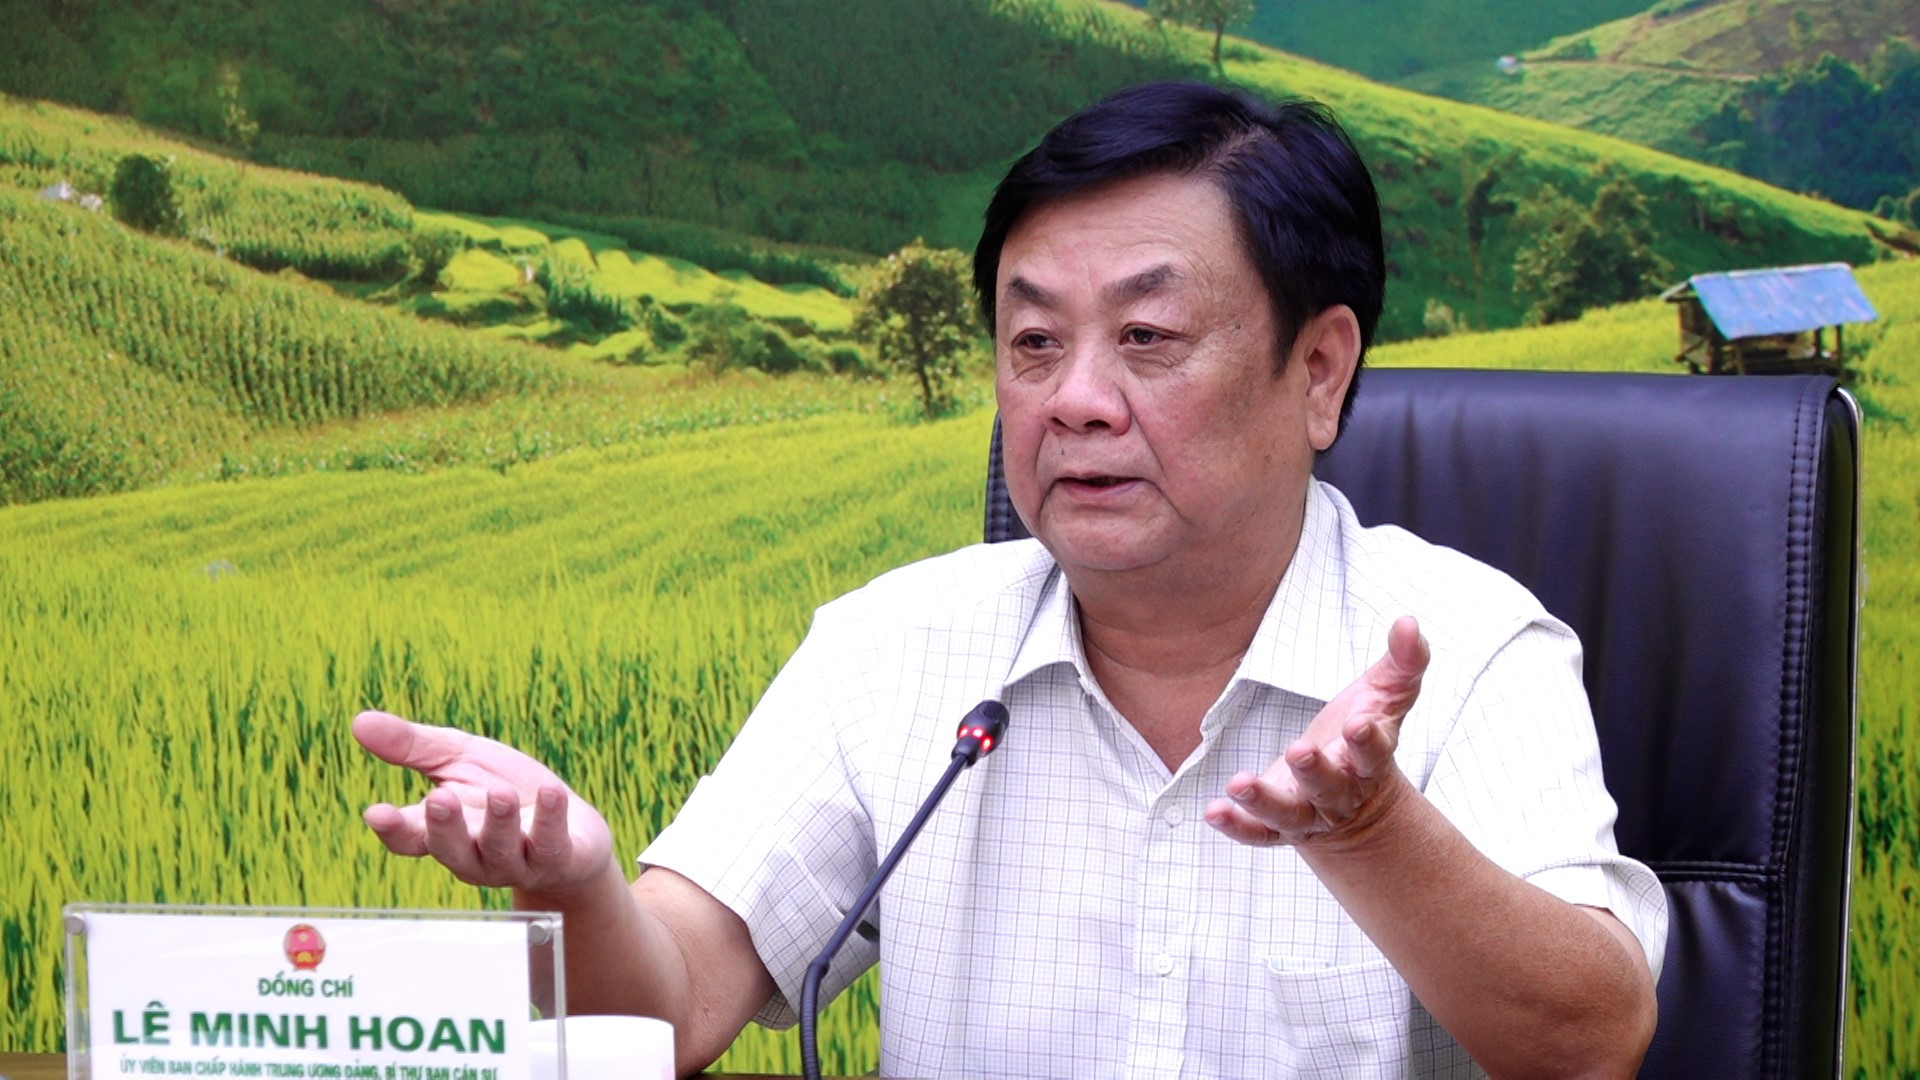 Minister of Agriculture and Rural Development Le Minh Hoan said: In the coming time, the Ministry of Agriculture and Rural Development (MARD) will continue to call for the sympathy, consensus, and companionship of VINAFIS and related associations. Photo: Quang Dung.